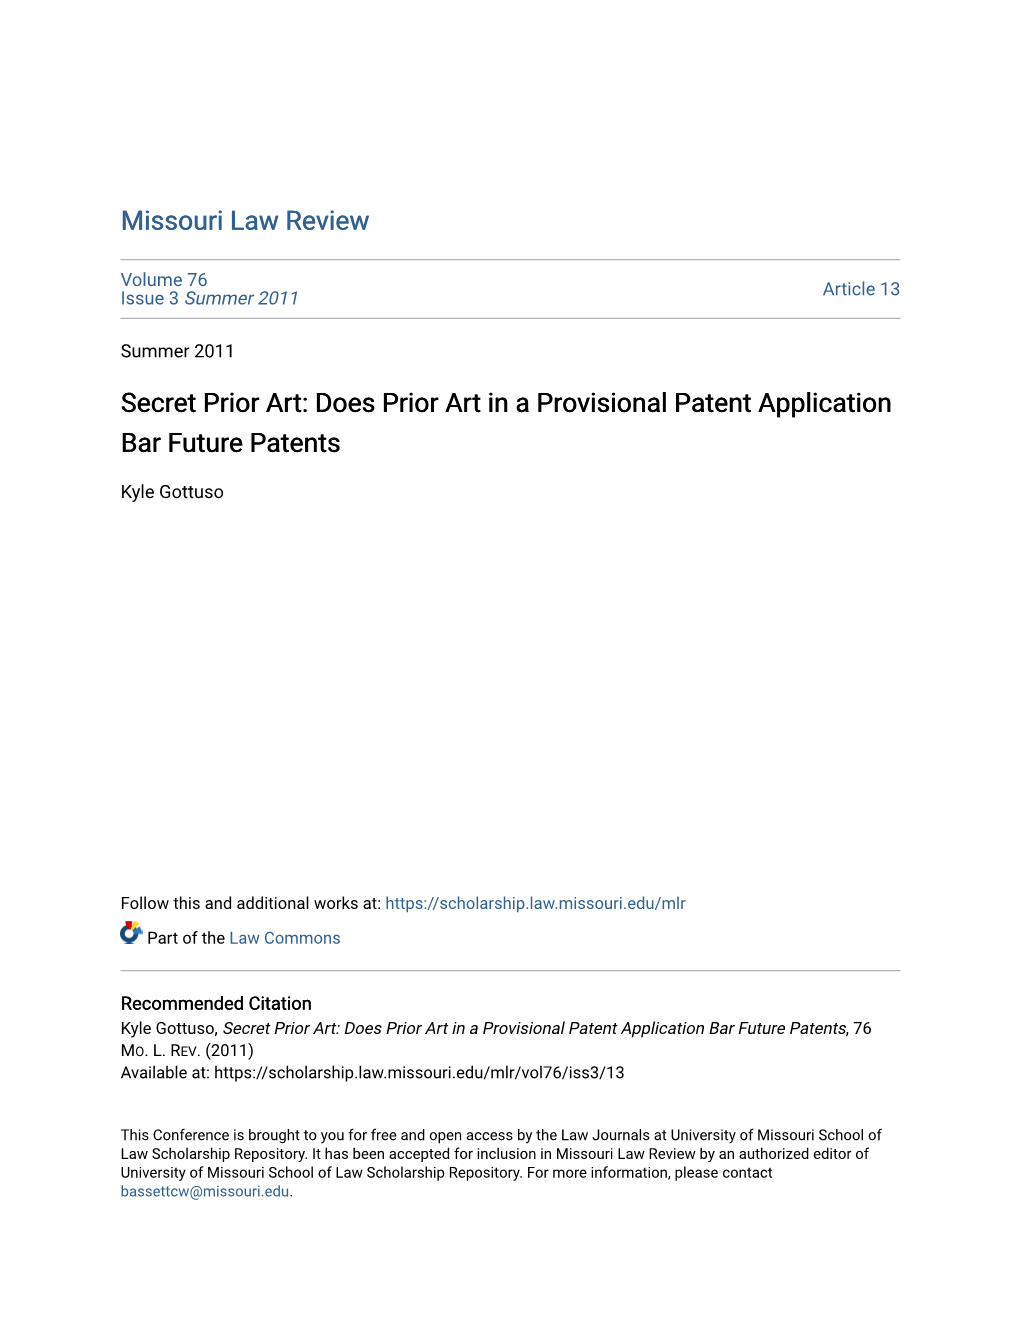 Does Prior Art in a Provisional Patent Application Bar Future Patents